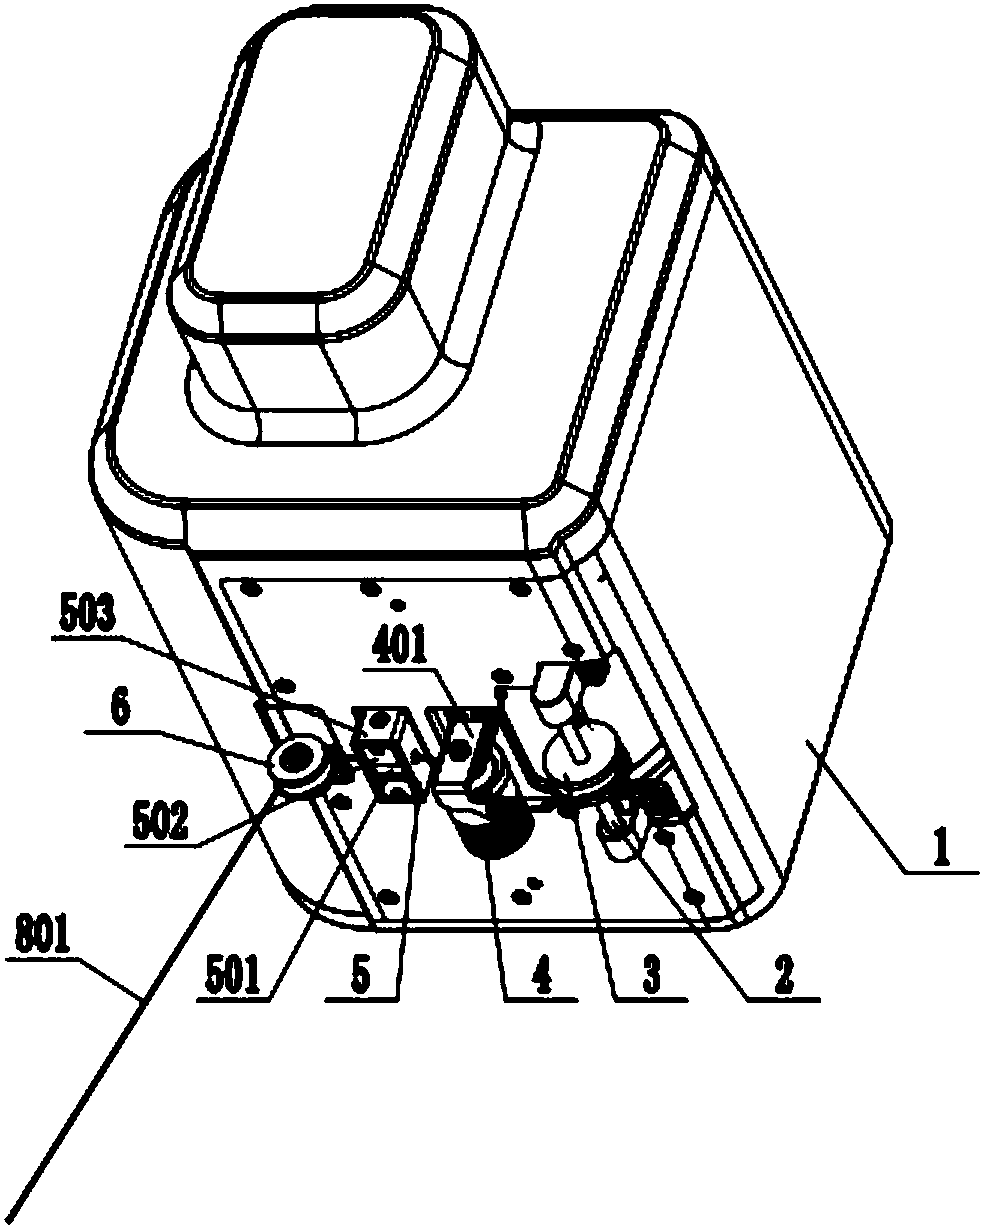 Automatic wire stringing and breaking device for a UAV (unmanned aerial vehicle)